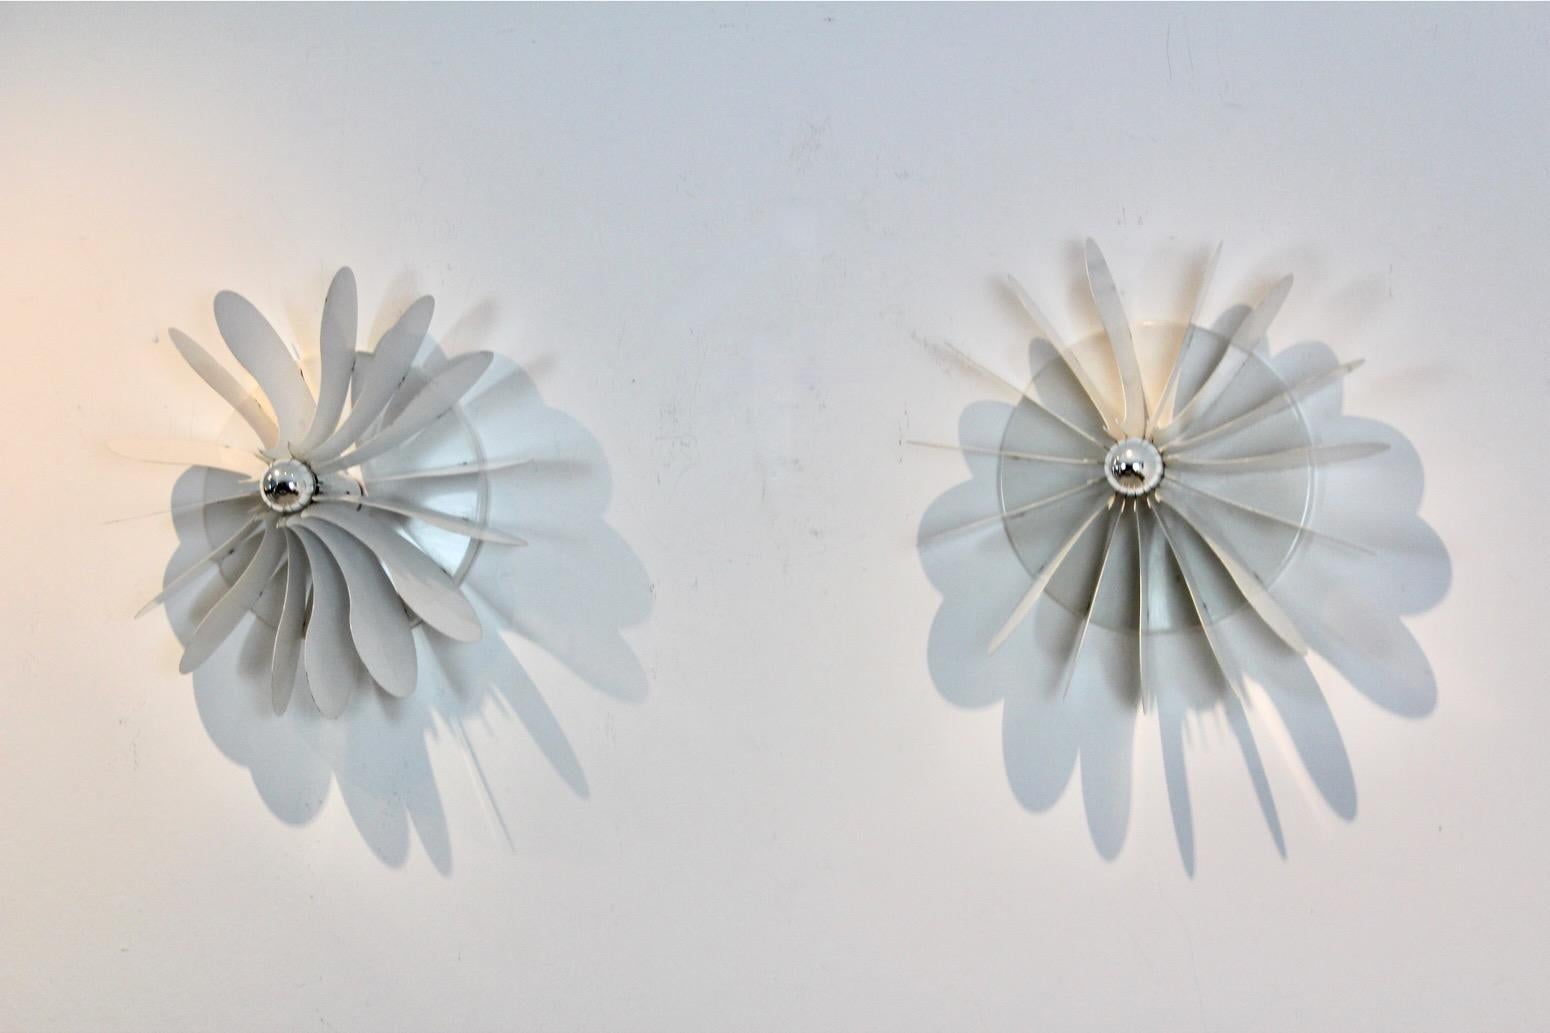 Graphical Bolide Sconces by Hermian Sneyders de Vogel for RAAK, Amsterdam, 4 pcs For Sale 1